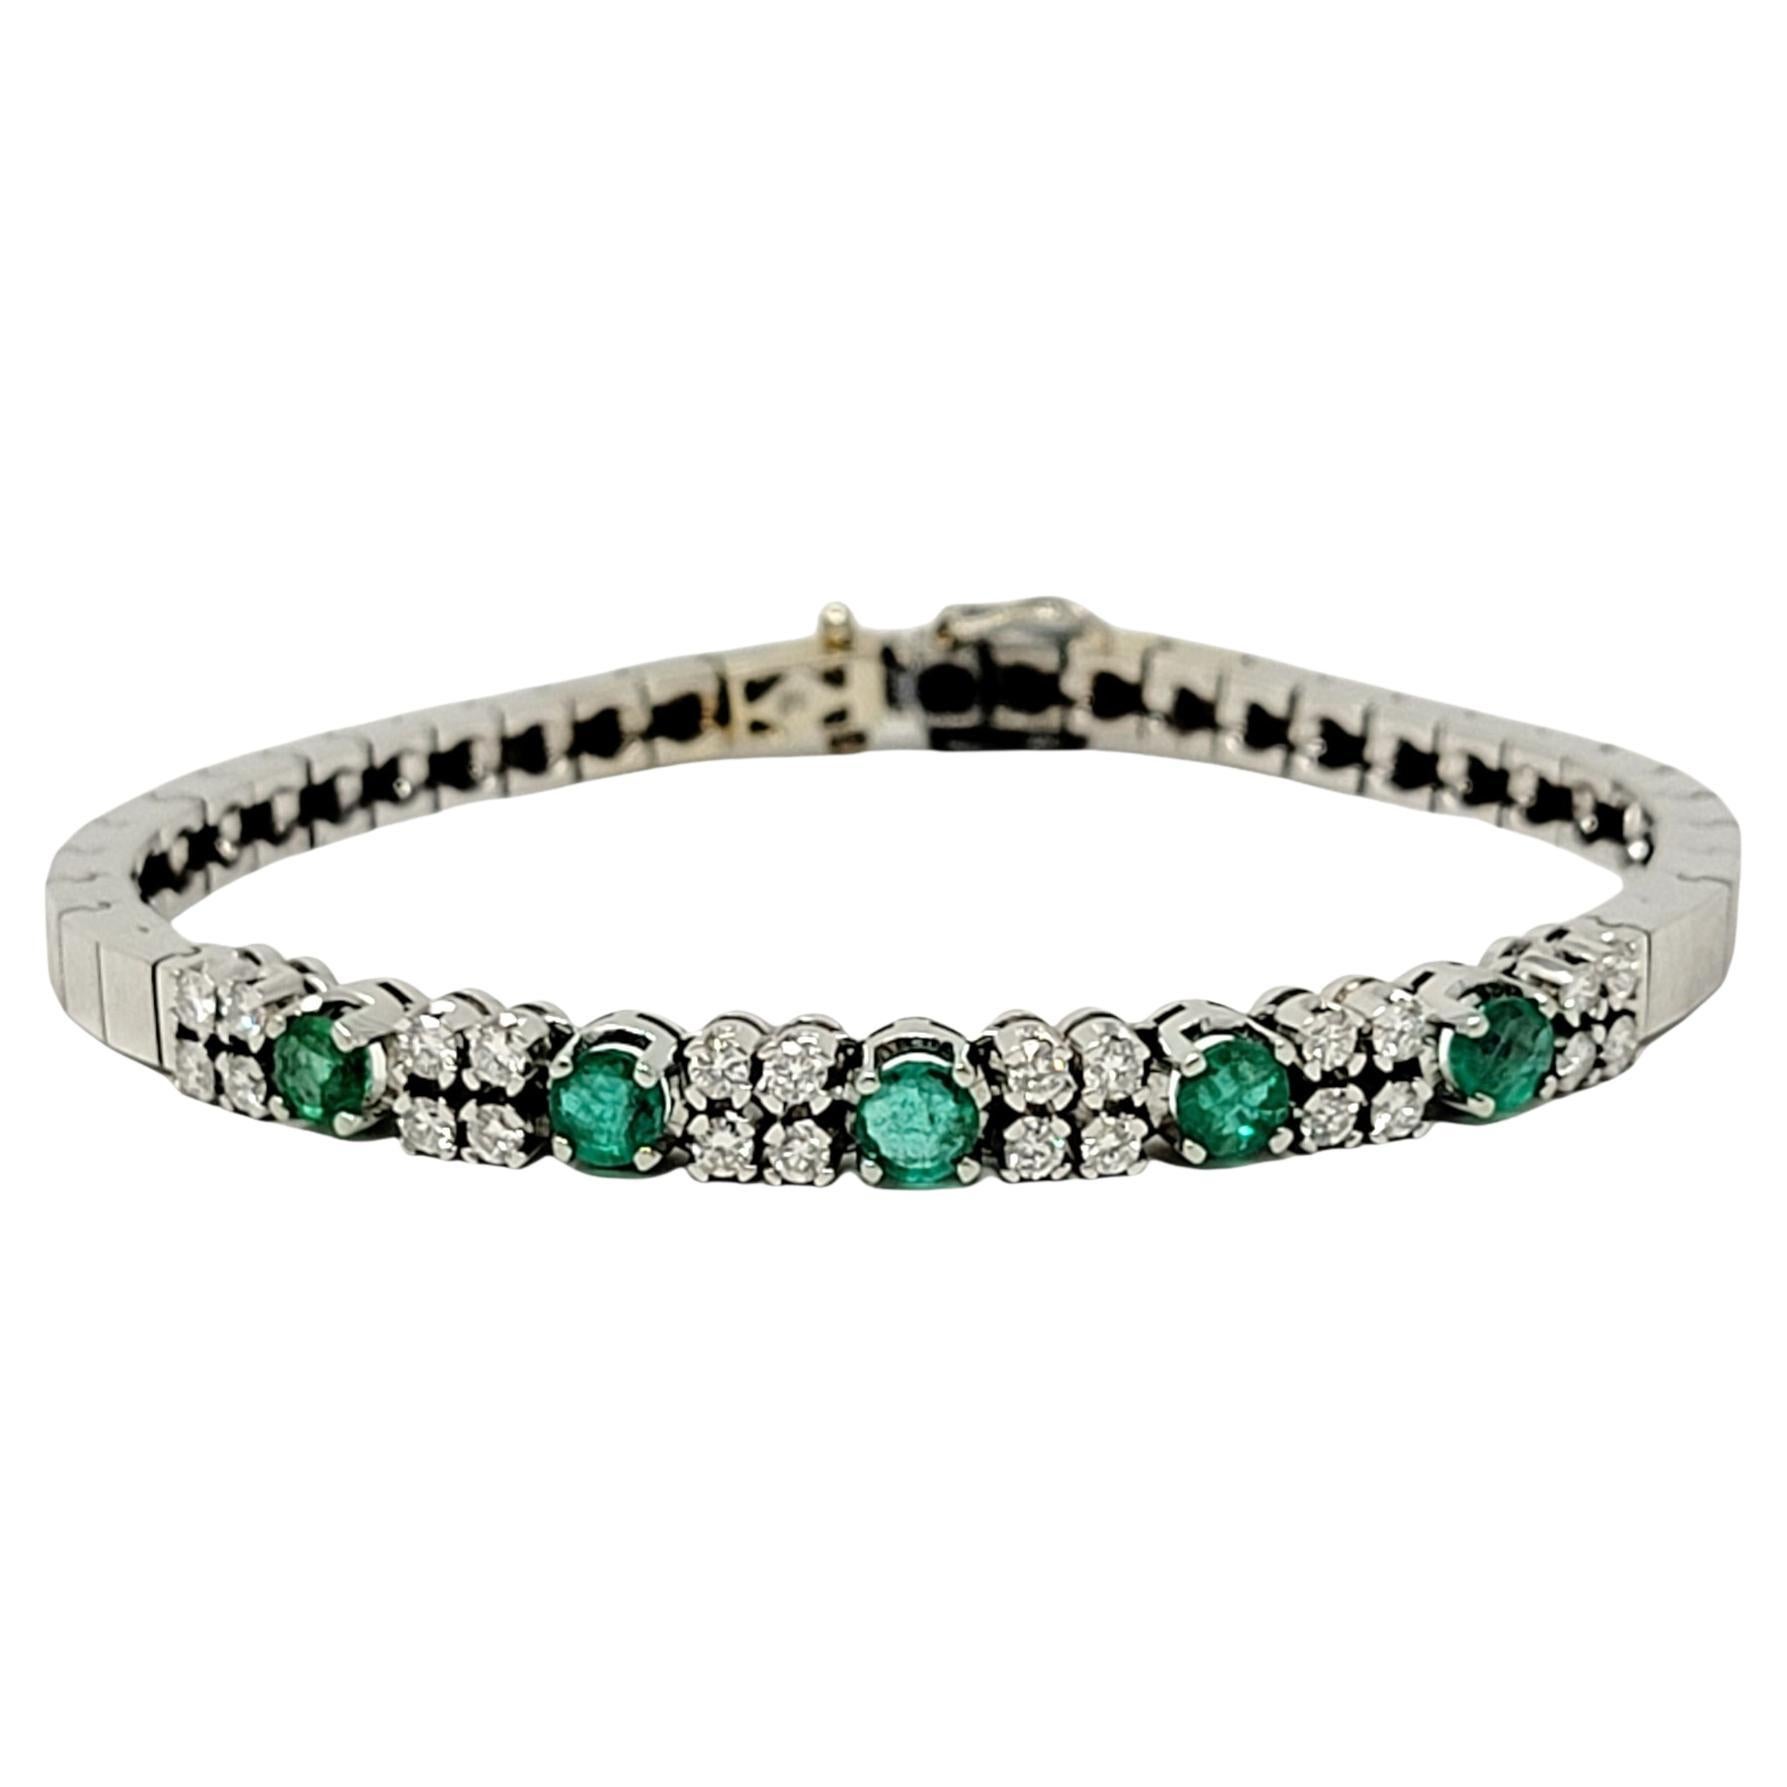 1.82 Carats Round Diamond and Emerald Link Bracelet in 18 Karat White Gold For Sale